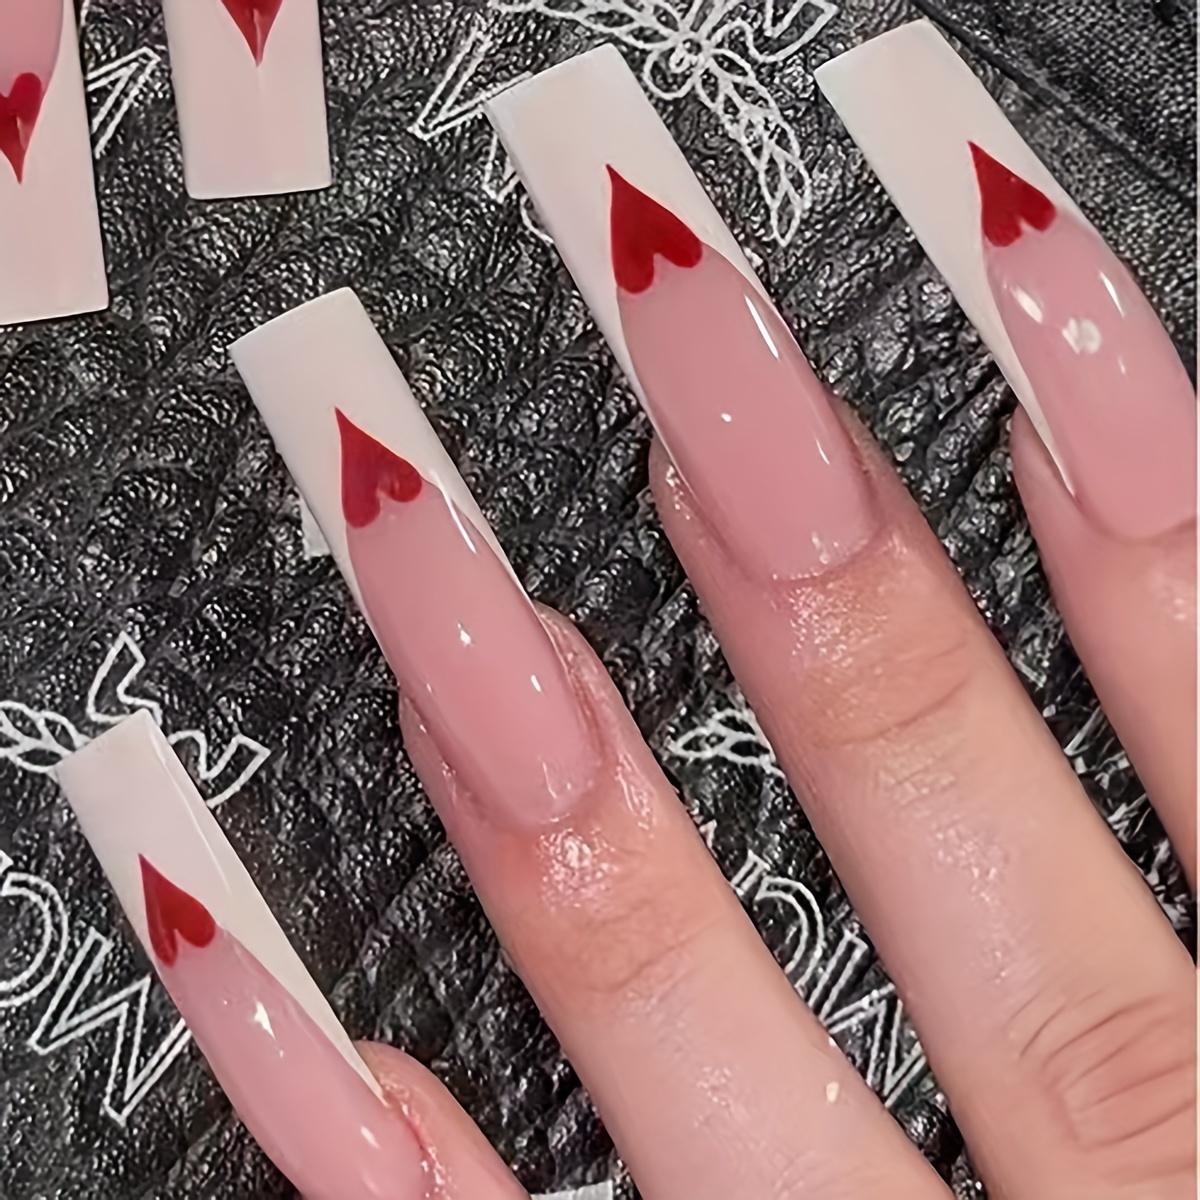  24 Pcs Press on Nails Medium Length Red Heart Coffin Design  Fake Nails Valentine's Day Nail Art Decorations Acrylic Nail Glue for False  Nails with Nail Adhesive Tabs for Women Girls